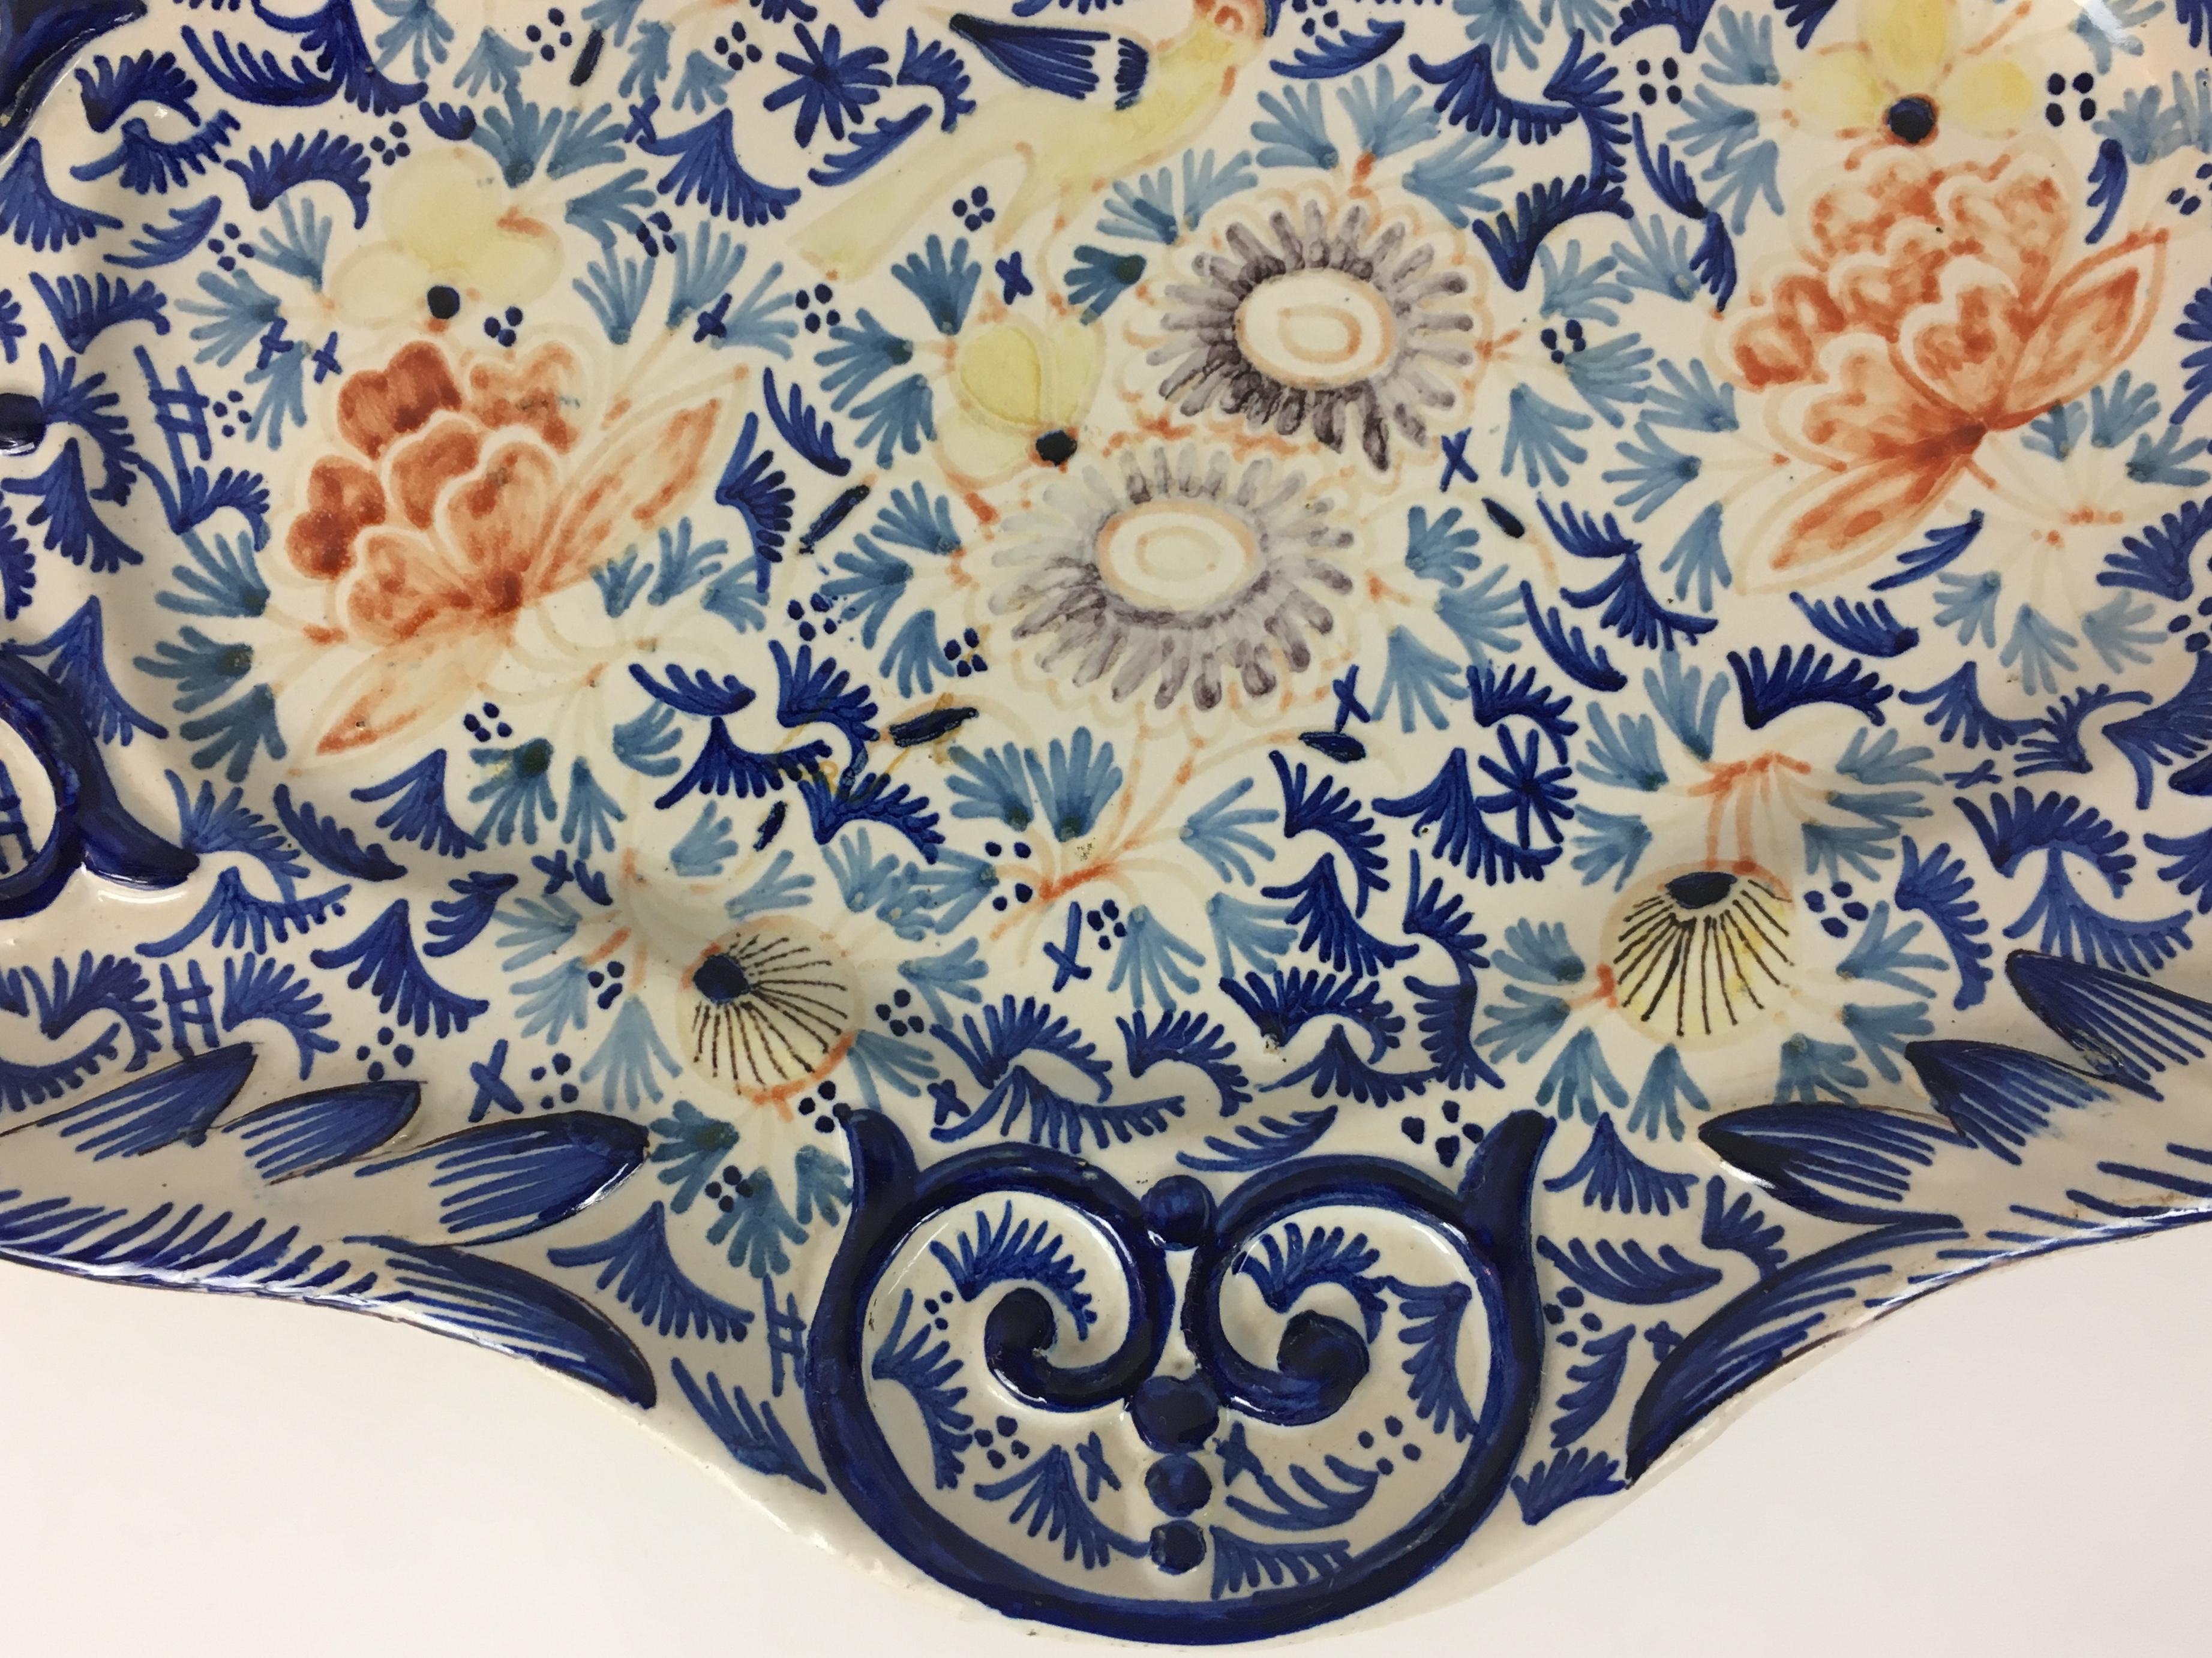 19th century Rouen earthenware platter with beautiful decoration France, circa 1750.
This traditional platter will enhance any table and your holiday serving dish selection. 

Good condition consistent with age, no visible cracks or chips.